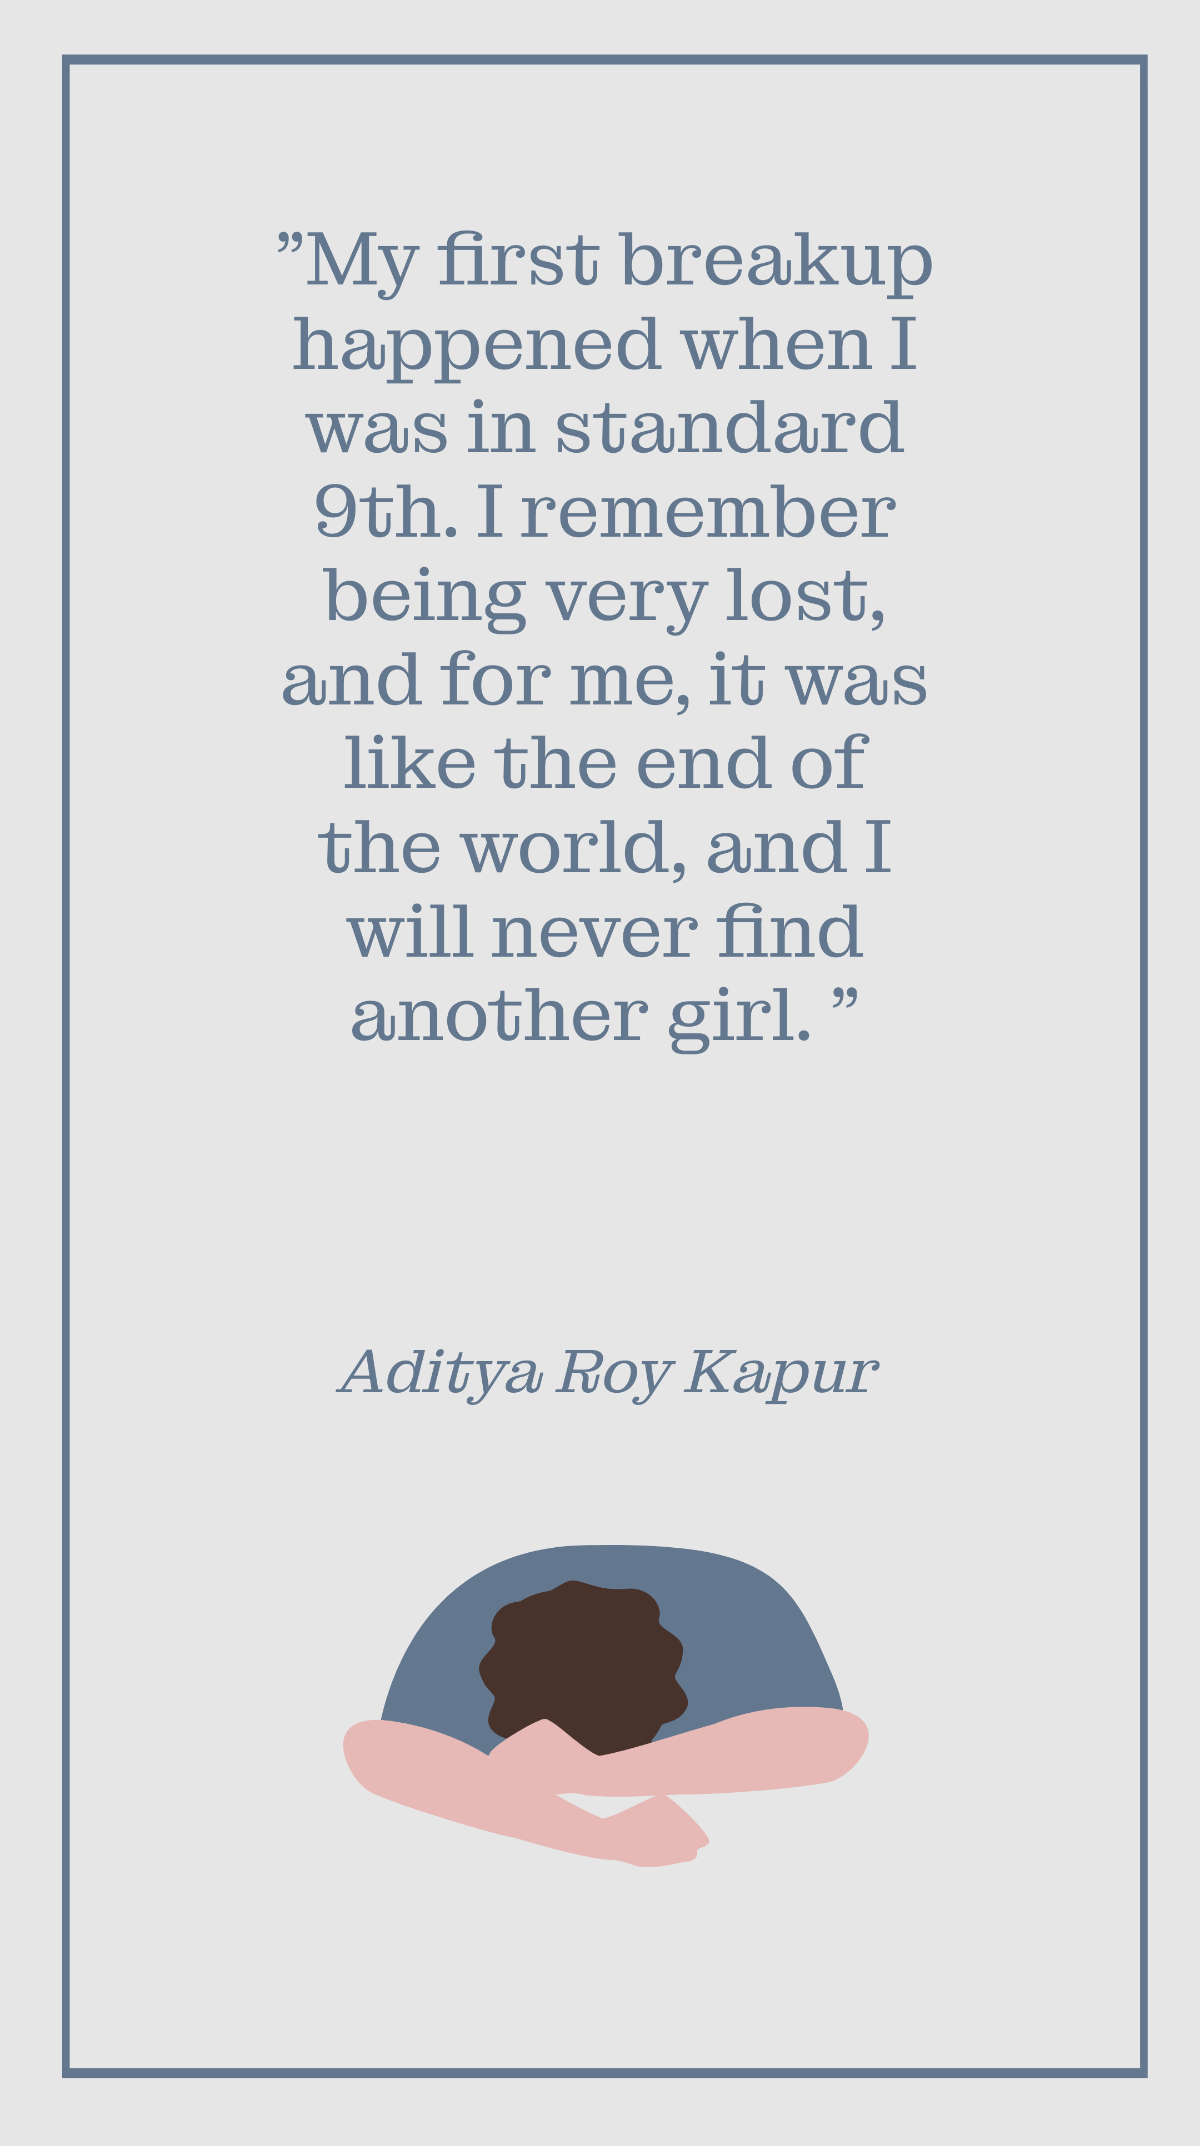 Aditya Roy Kapur - My first breakup happened when I was in standard 9th. I remember being very lost, and for me, it was like the end of the world, and I will never find another girl.